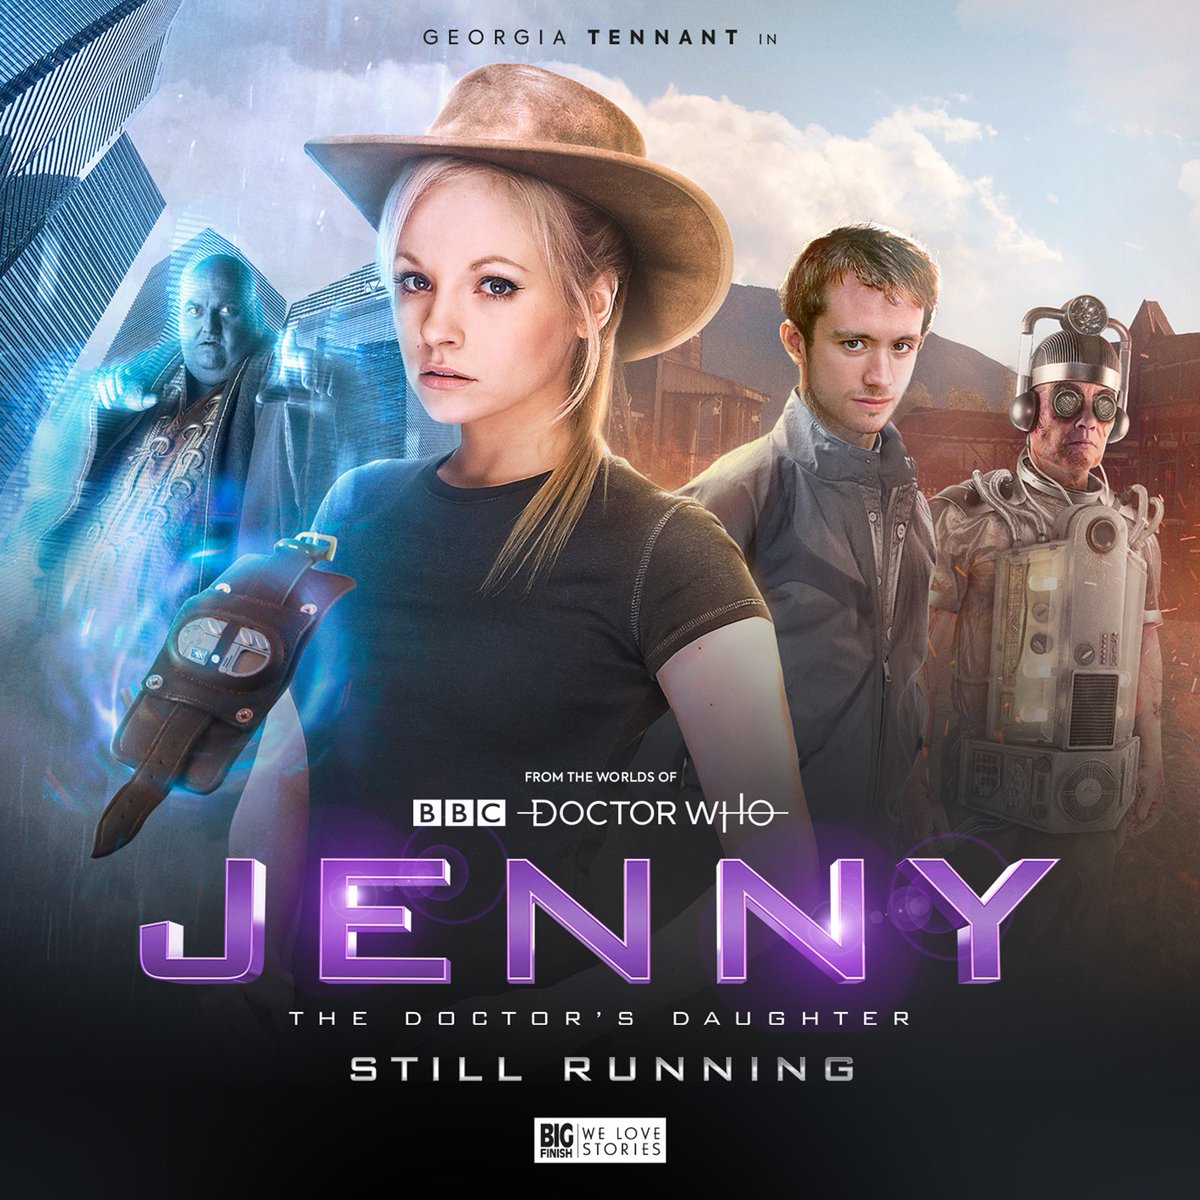 RT @bigfinish: Jenny's back! And she's in for some rootin'-tootin' adventures!  https://t.co/Az7c6WPOEY https://t.co/R3bHJUWmus